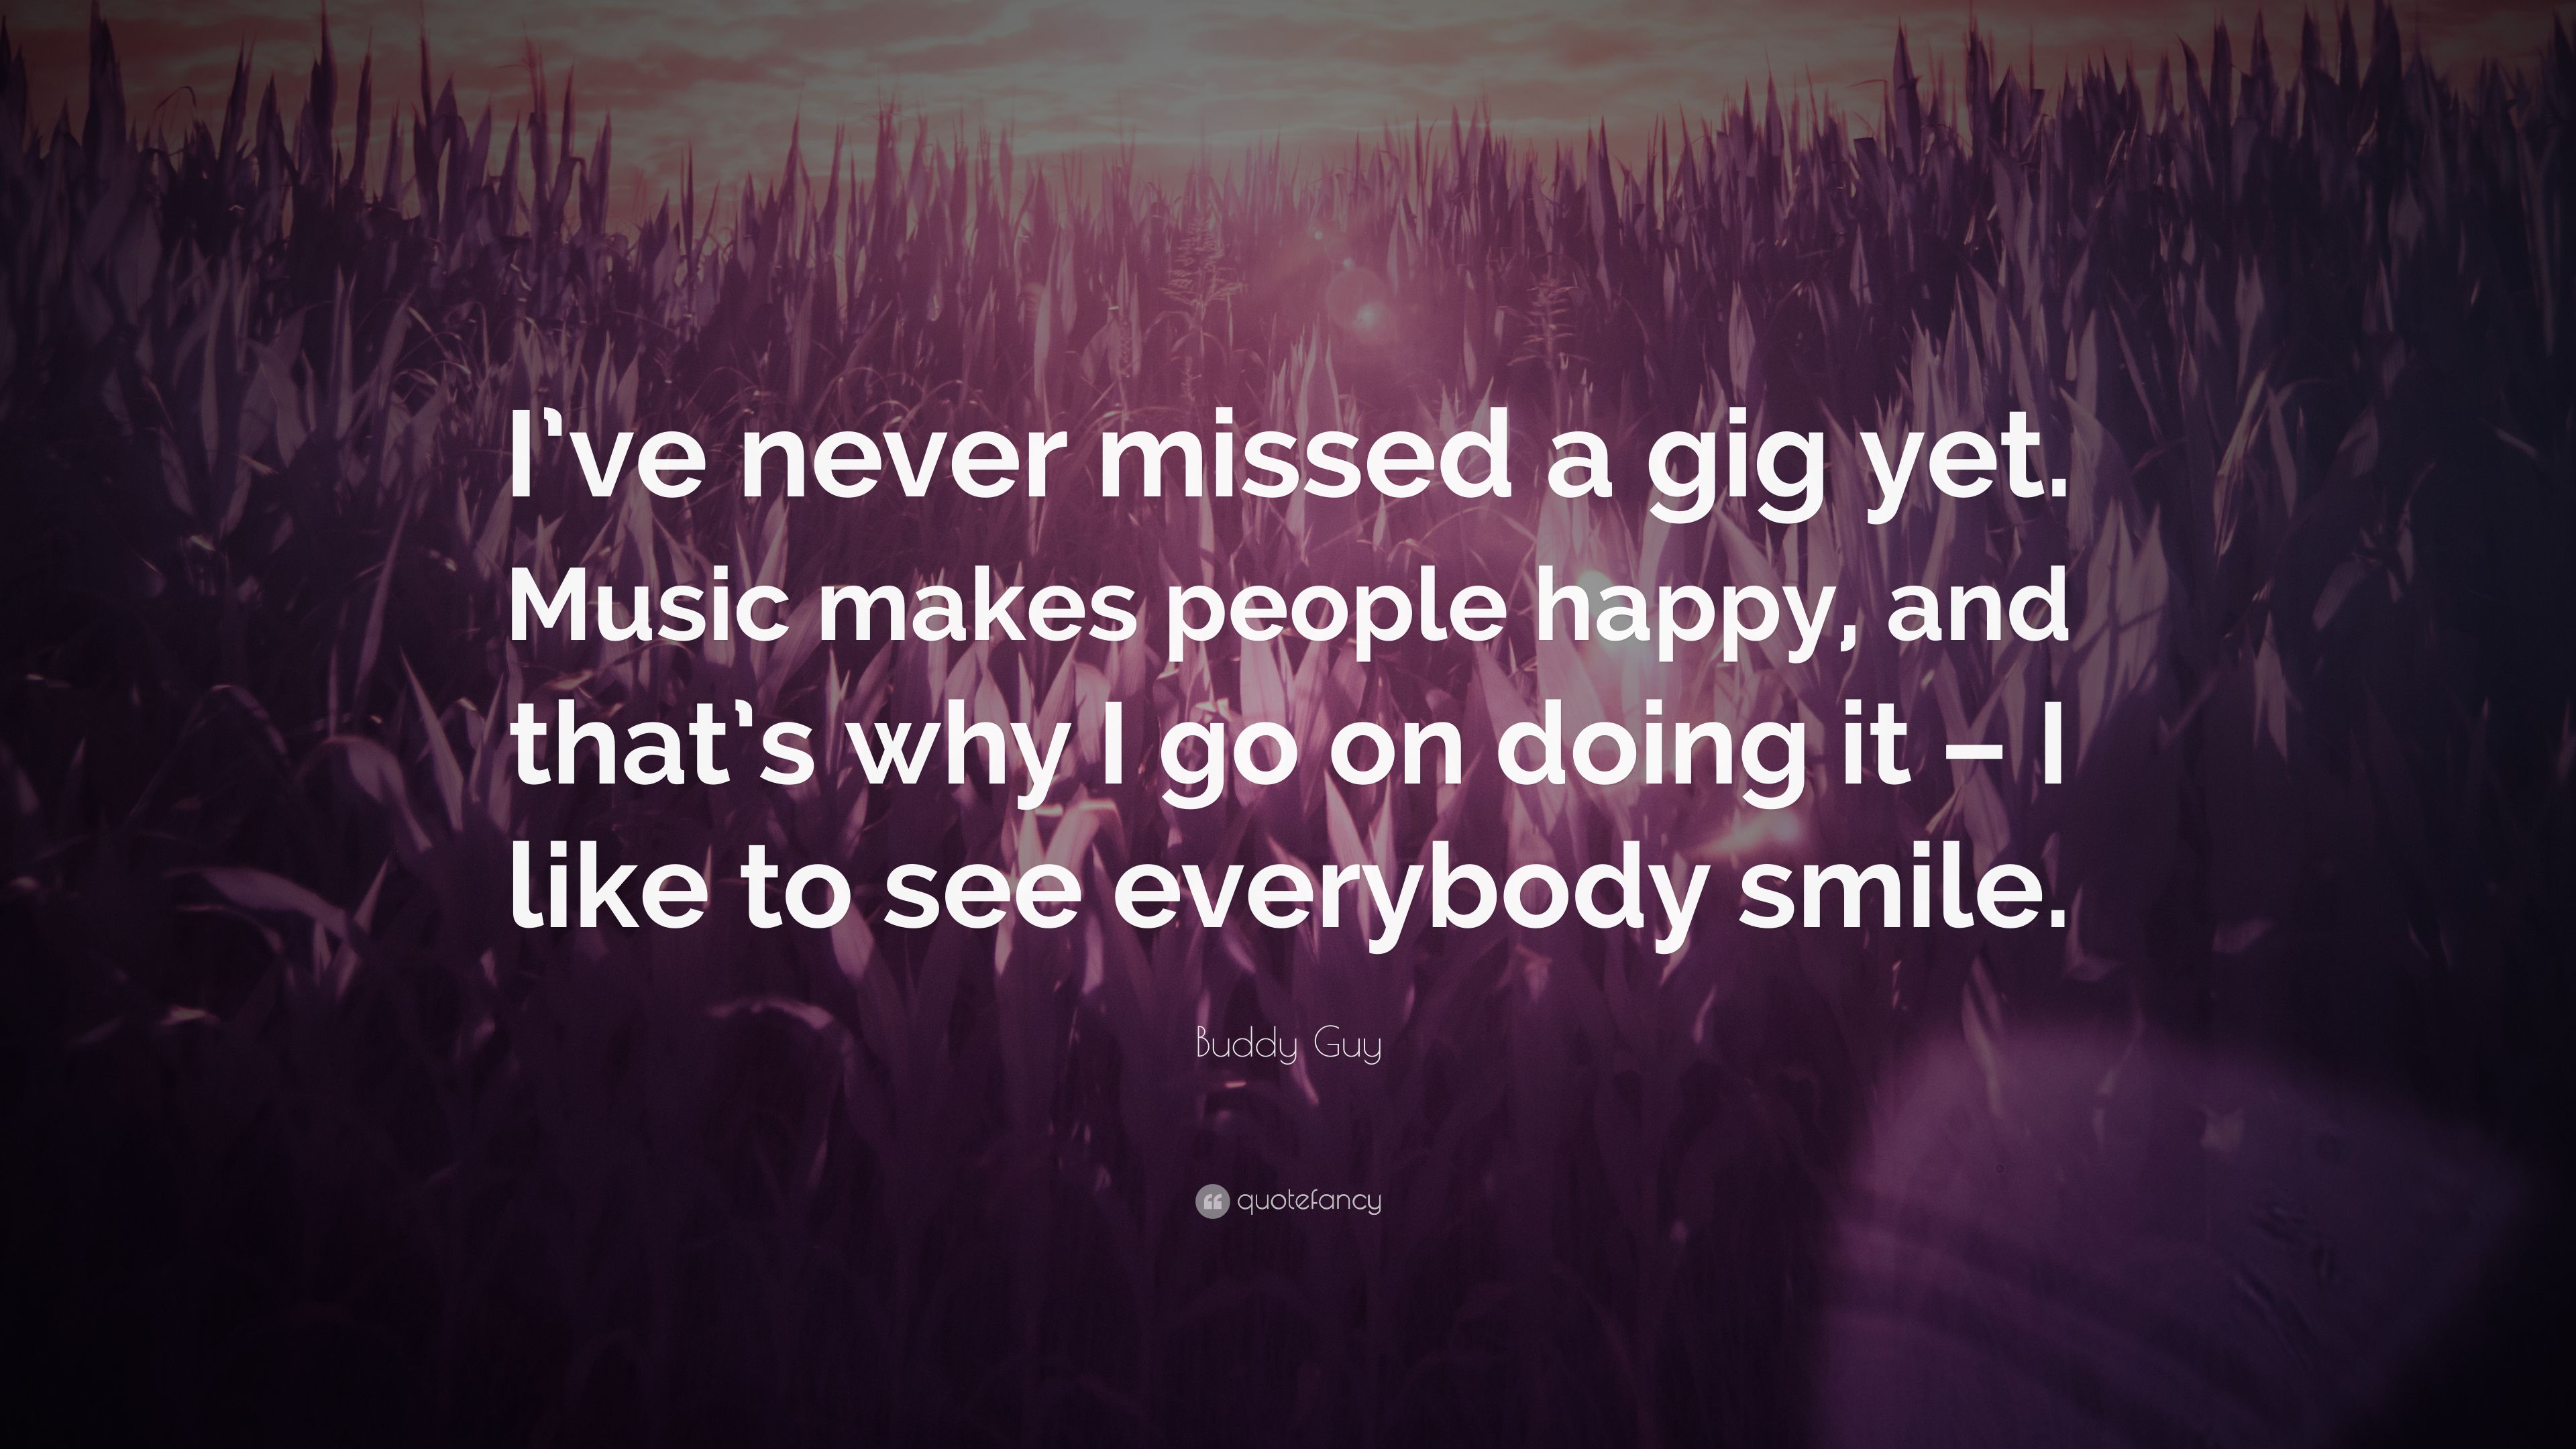 Buddy Guy Quote: “I've never missed a gig yet. Music makes people